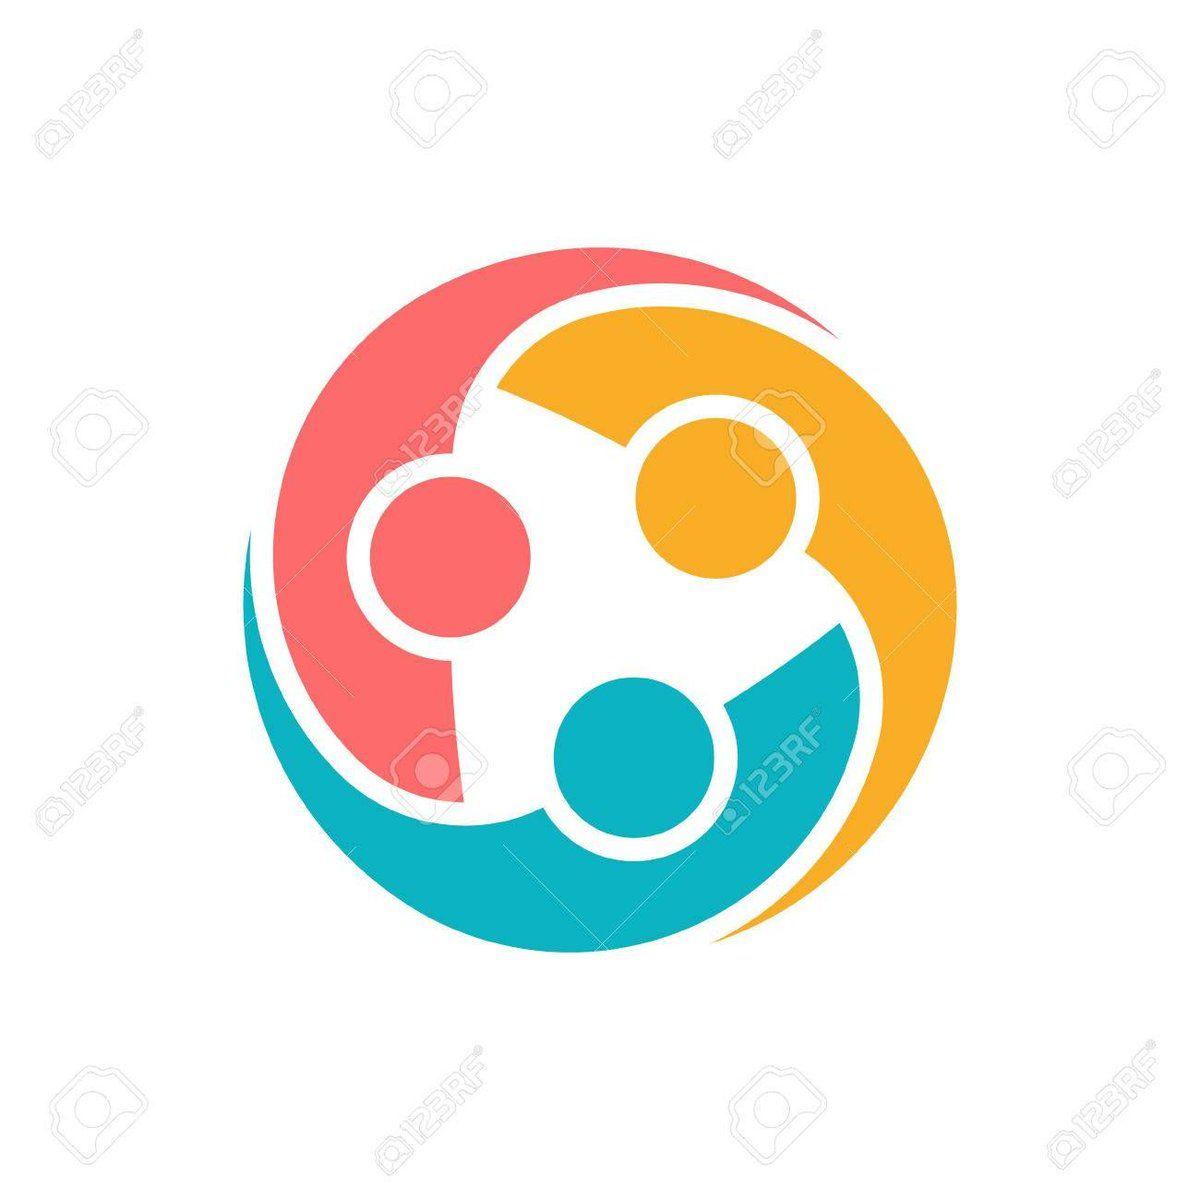 Person Group Logo - LogoStockImages on Twitter: 